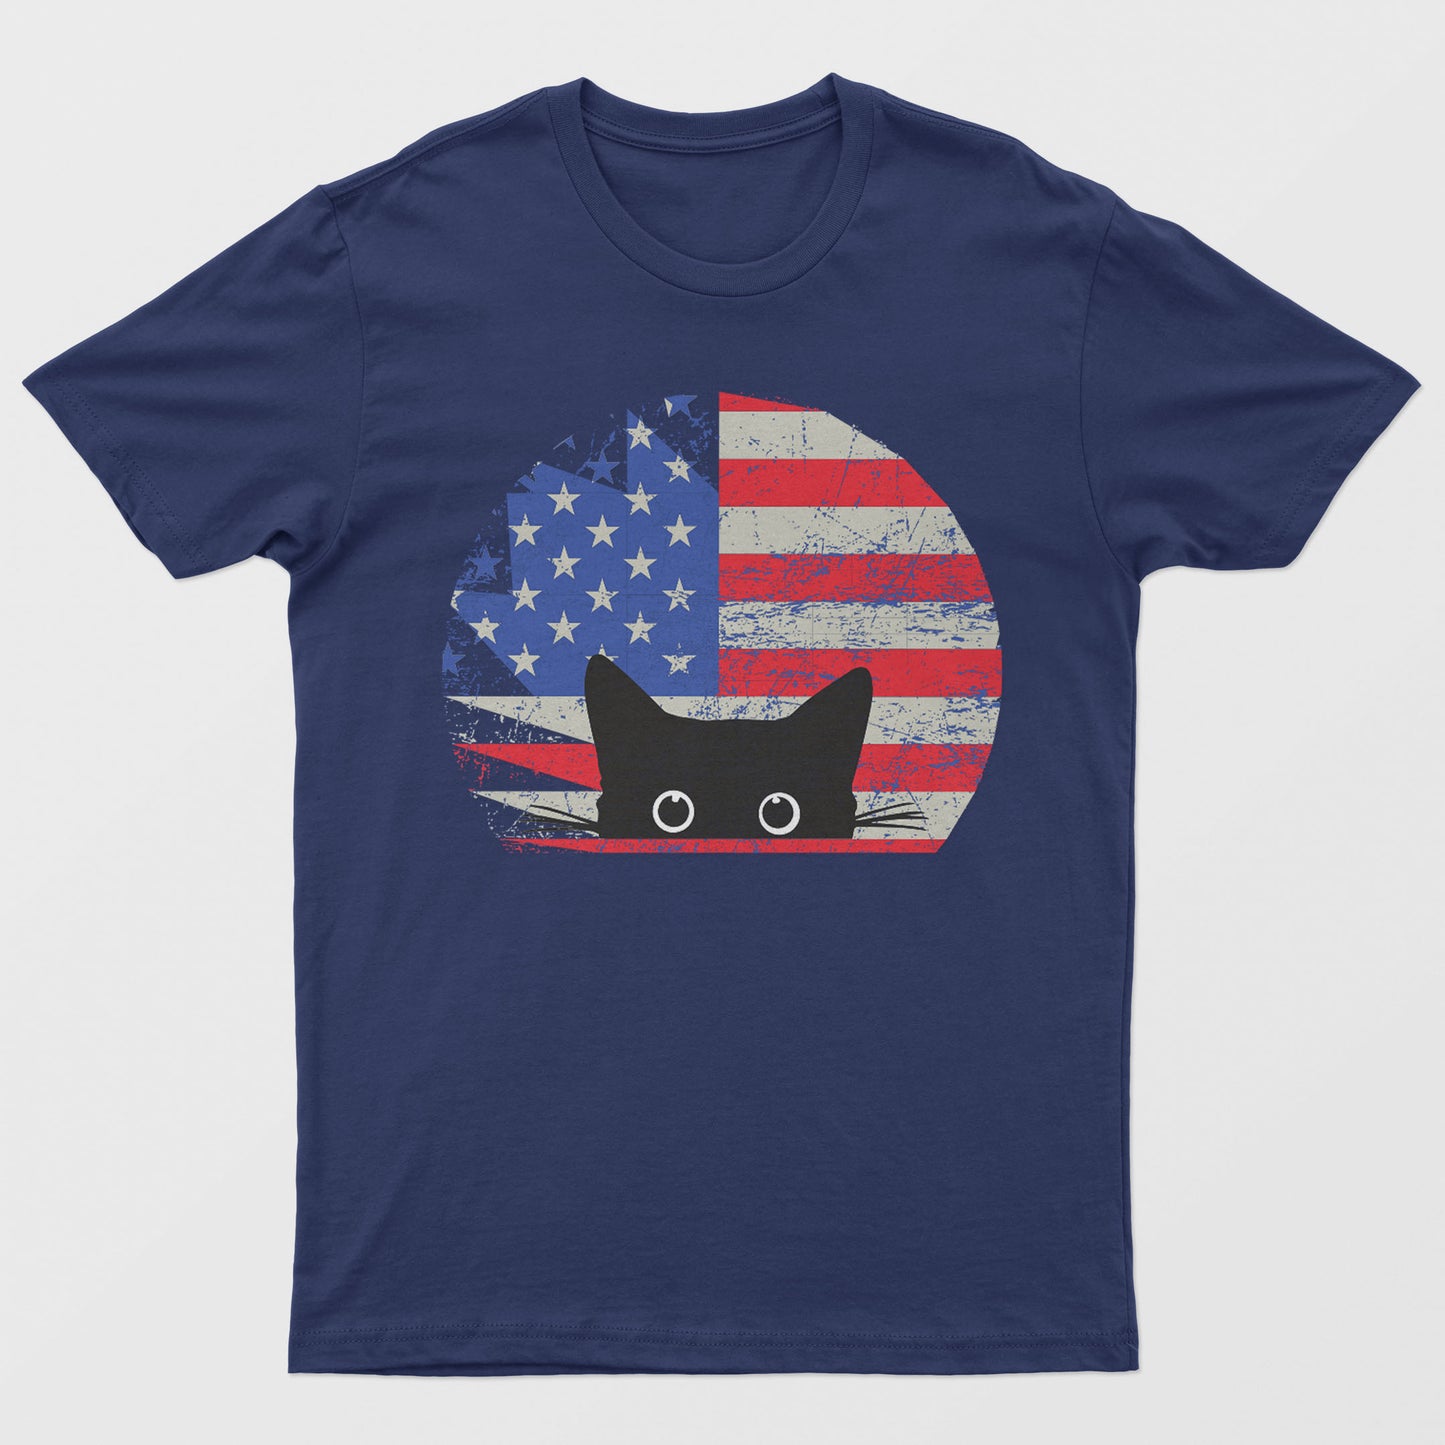 Unisex Cat in US Flag Graphic Print T-Shirt - S-XXXL, Various Colors, Free Ship